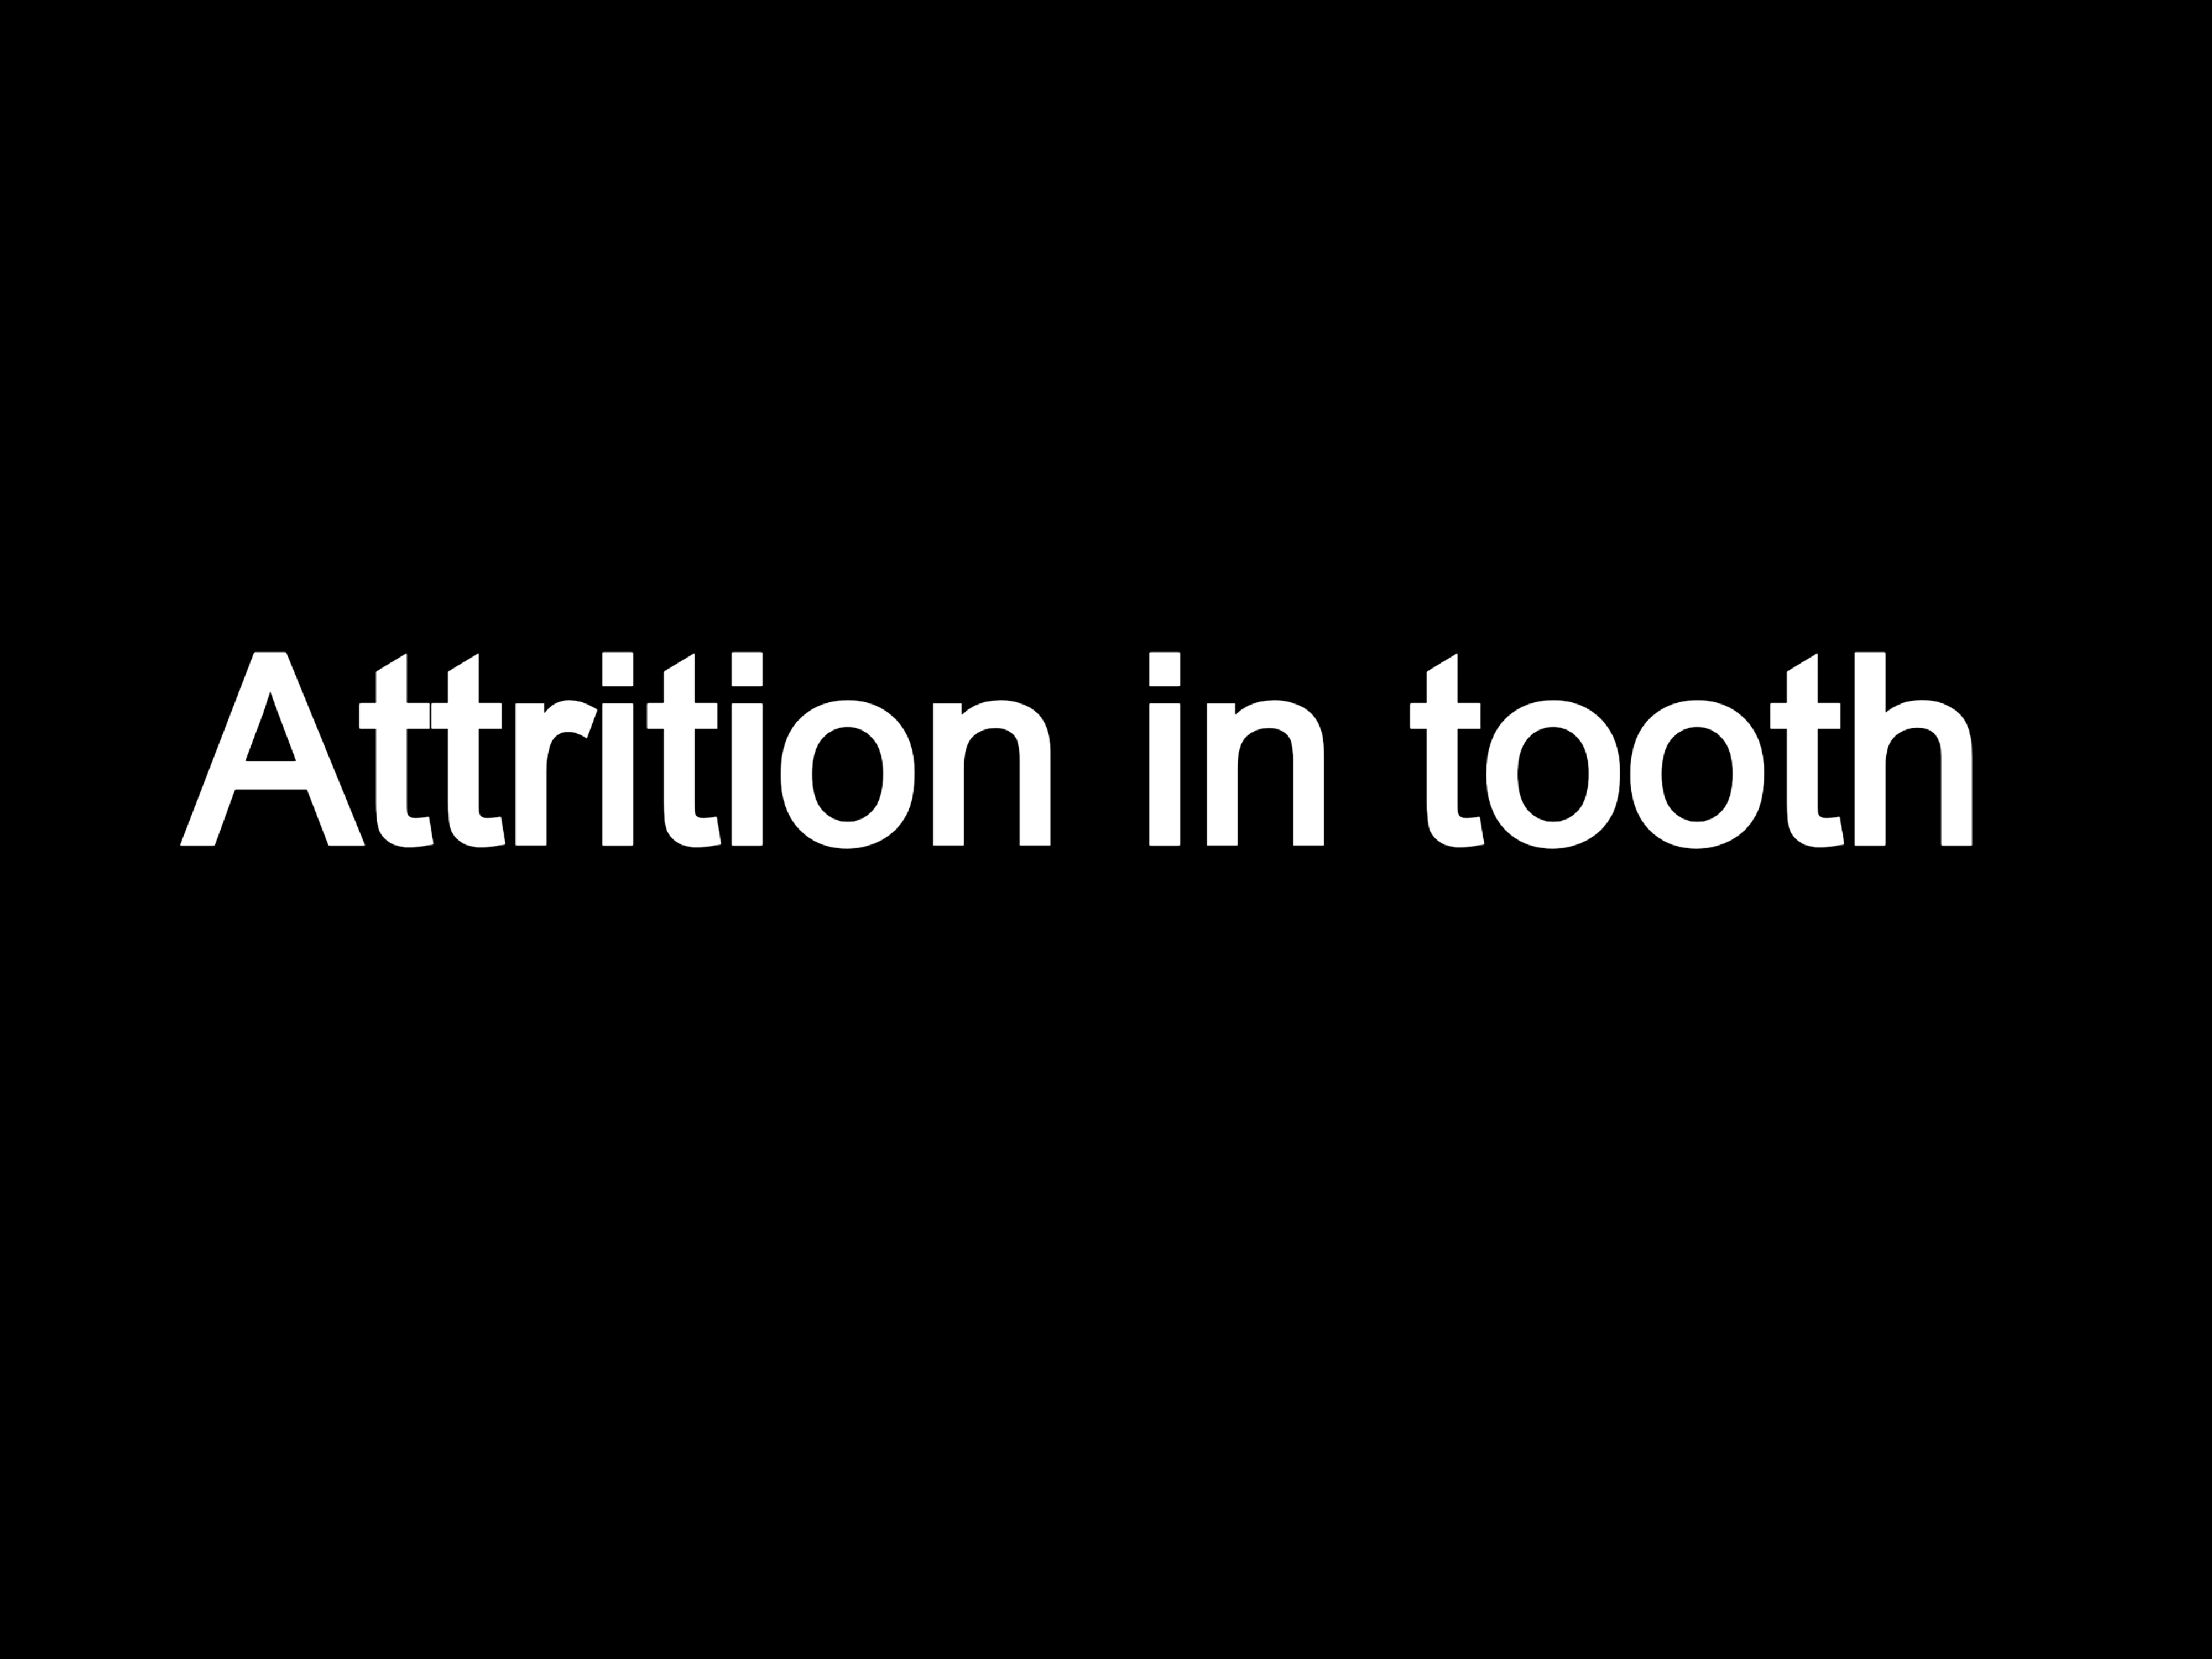 Attrition in tooth